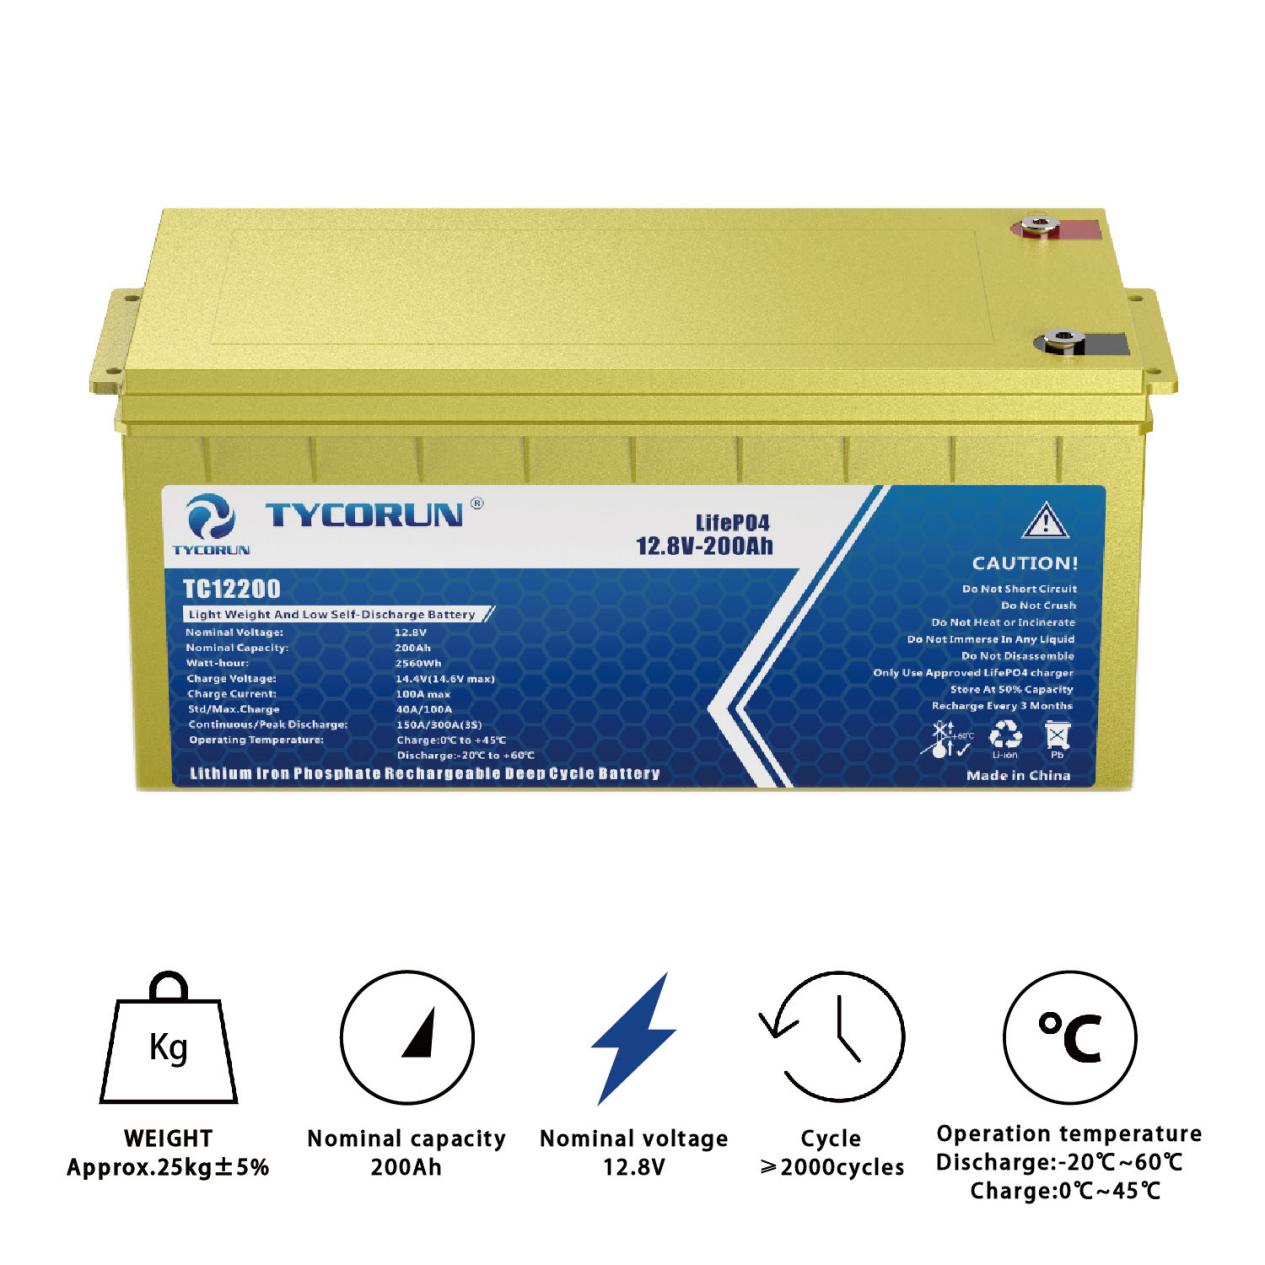 3.What advantages a lipo battery offers?